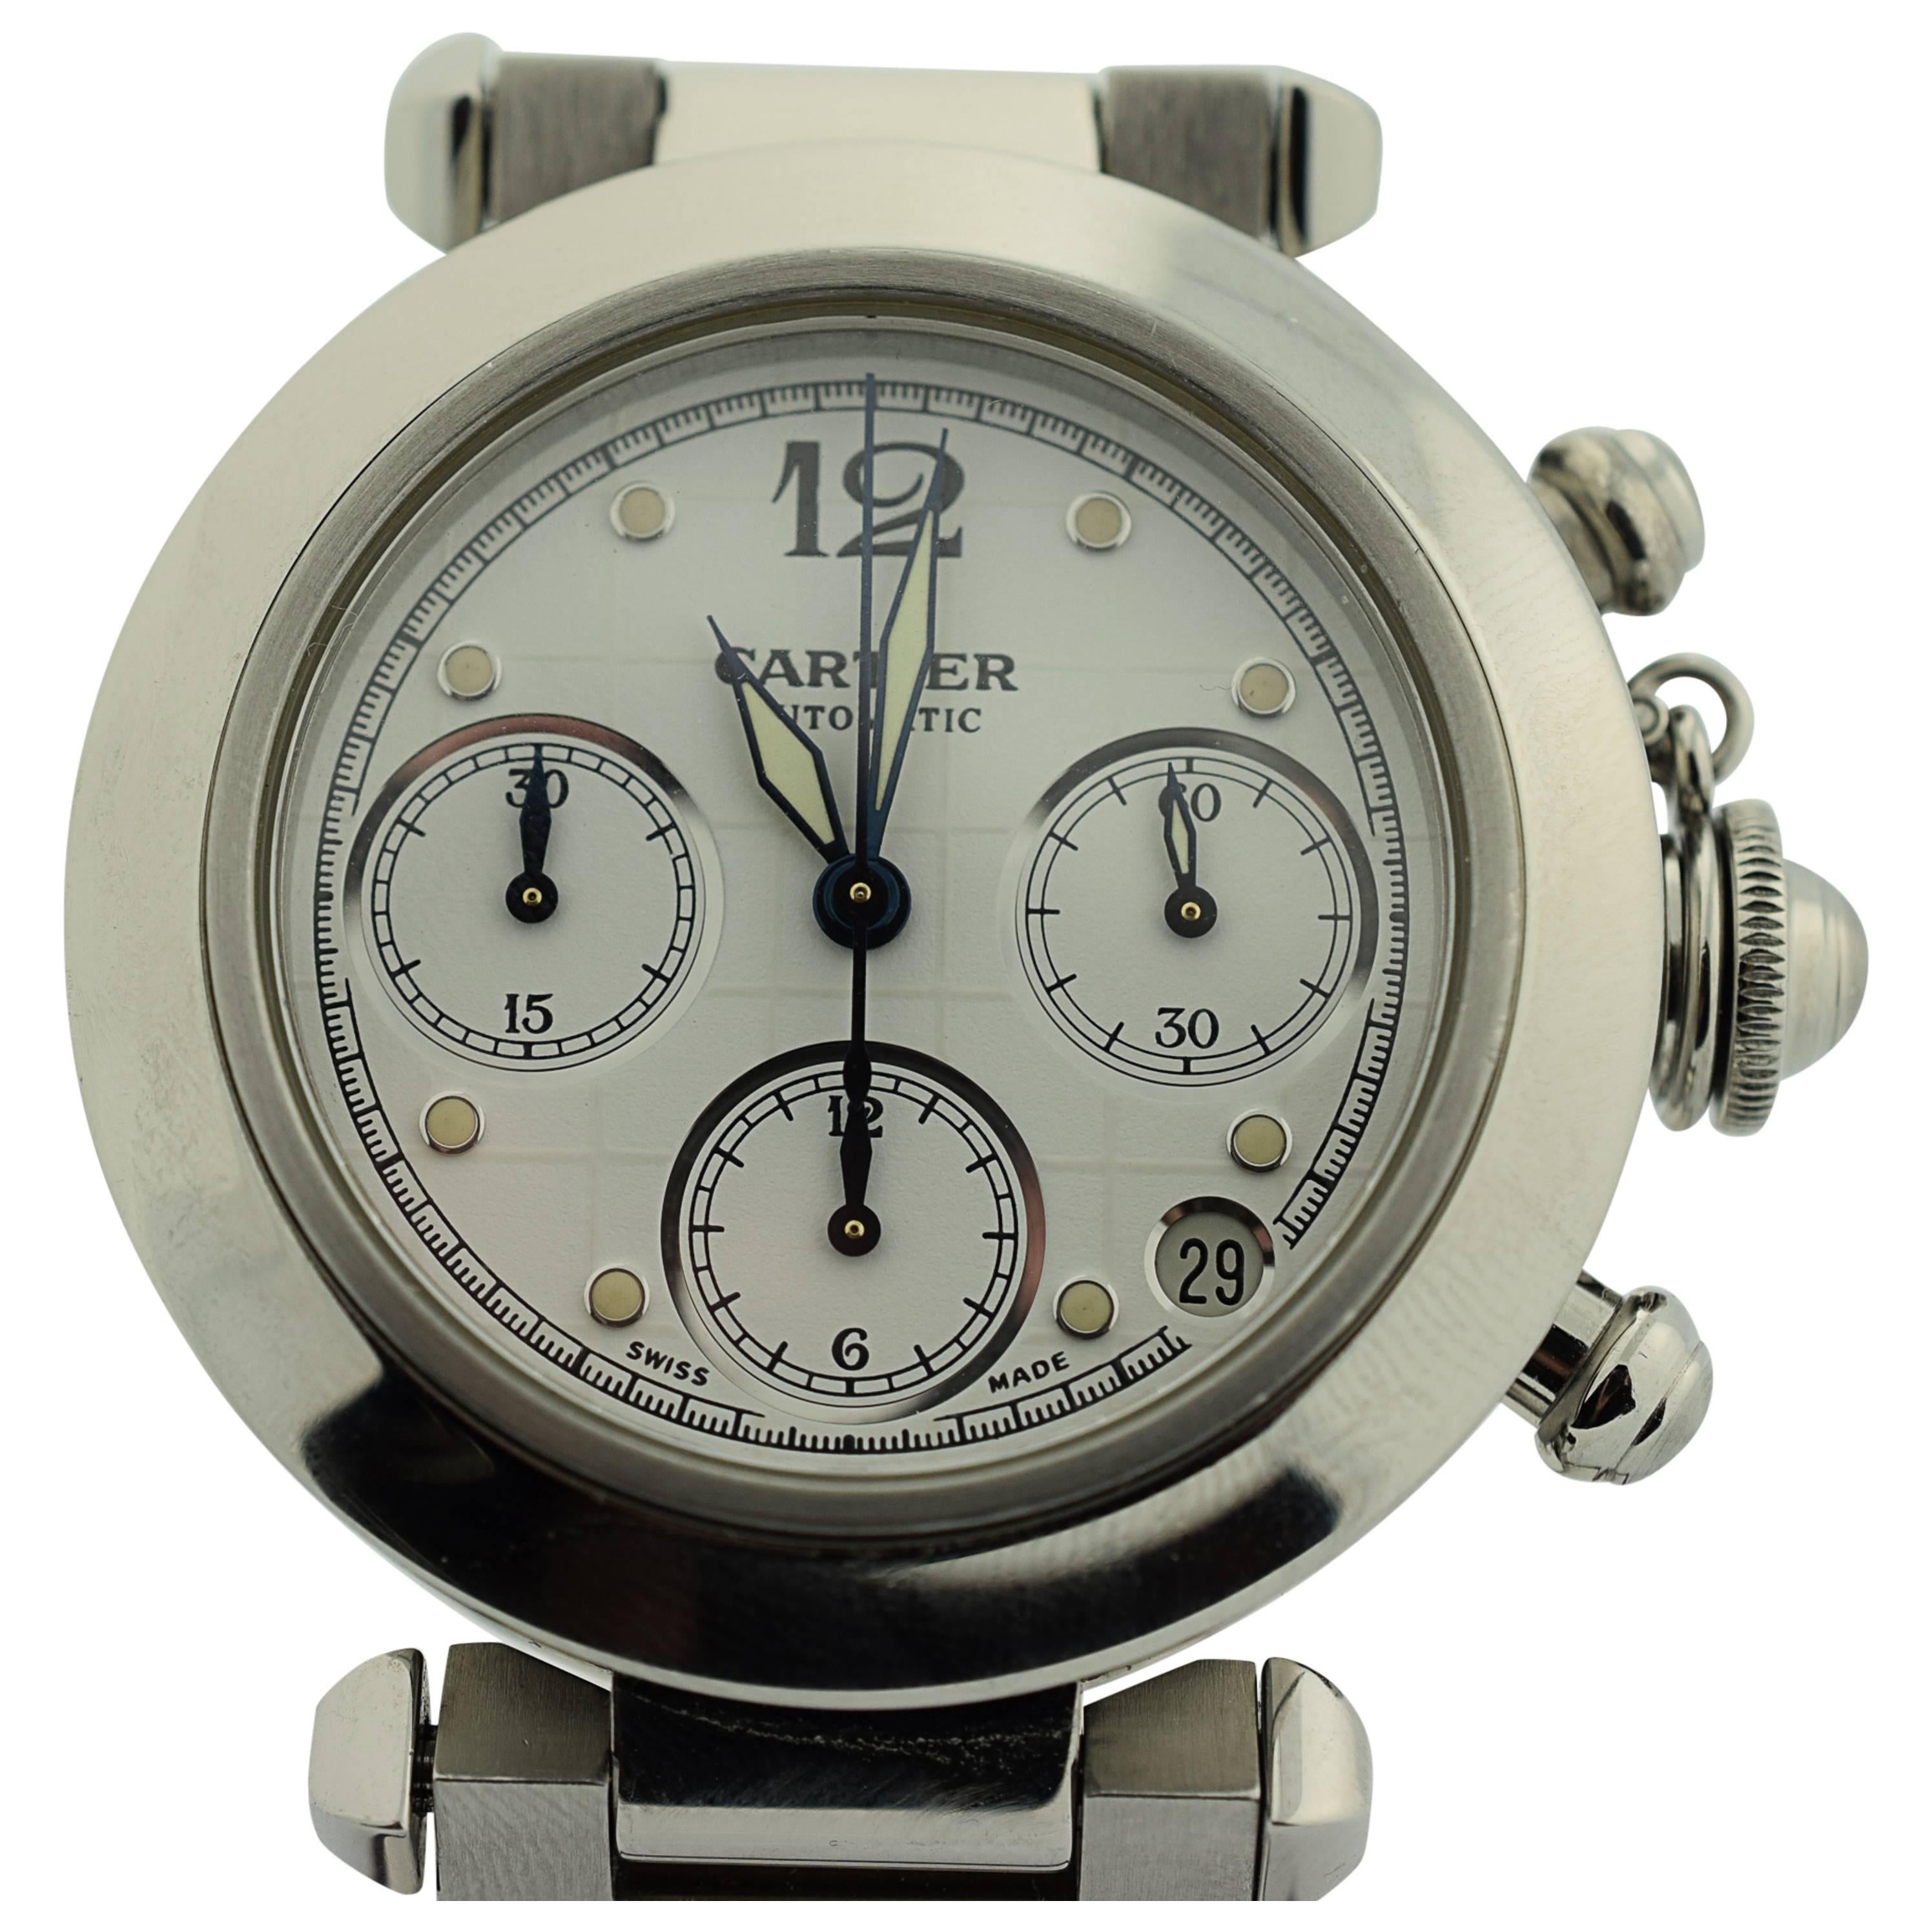 Cartier Stainless Steel Automatic Pasha Chronograph Wristwatch Ref 2412